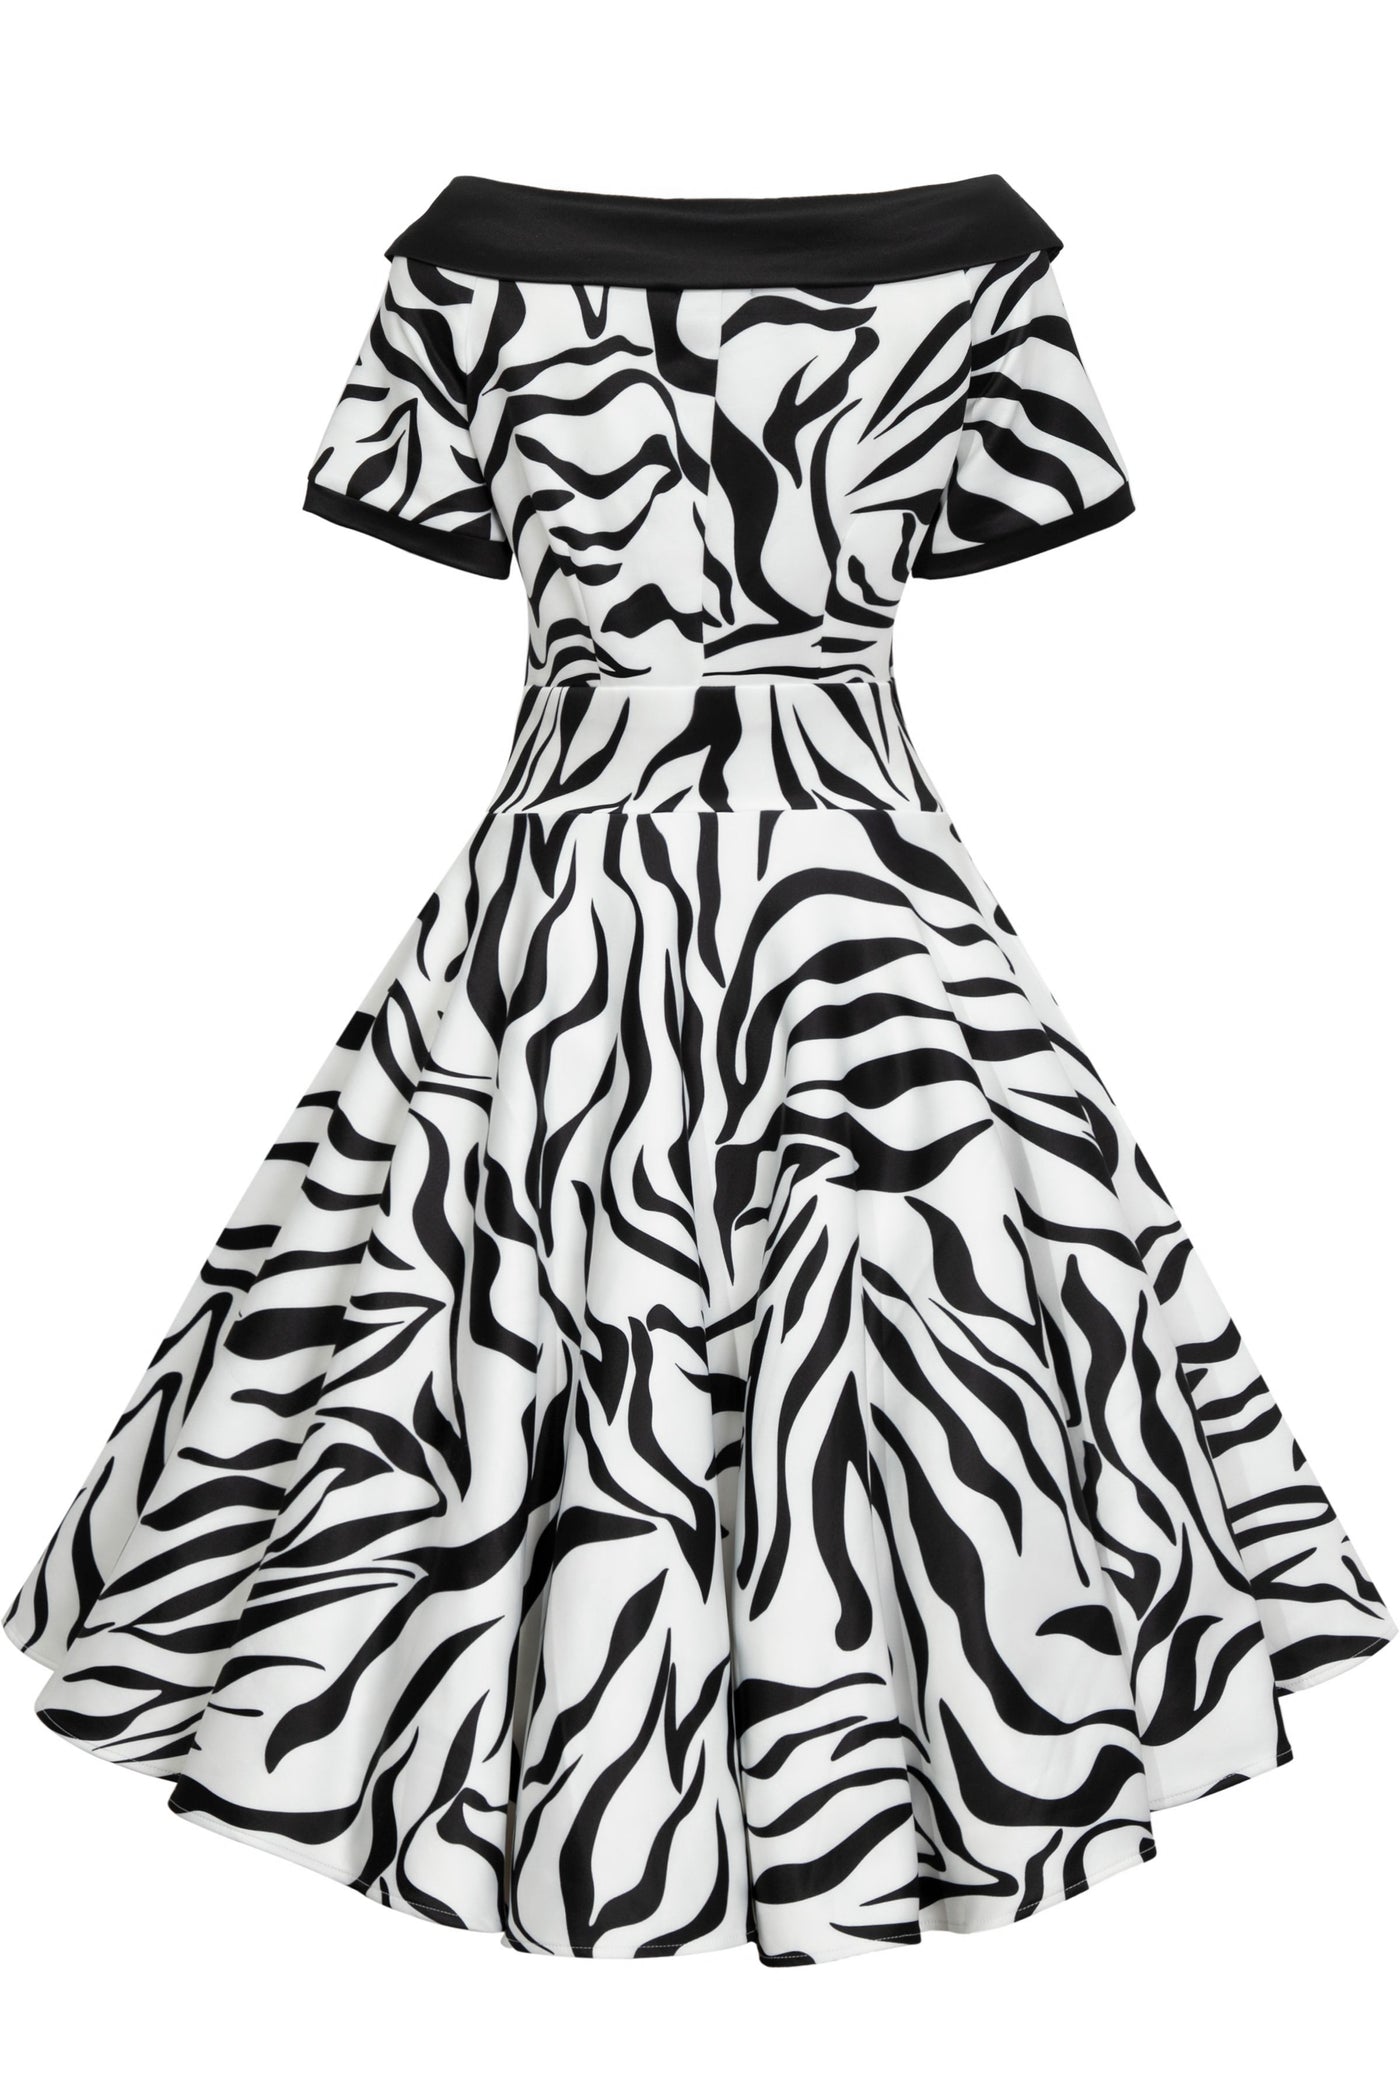 Short sleeved flared dress, in white and black zebra print, with a black petticoat, back view